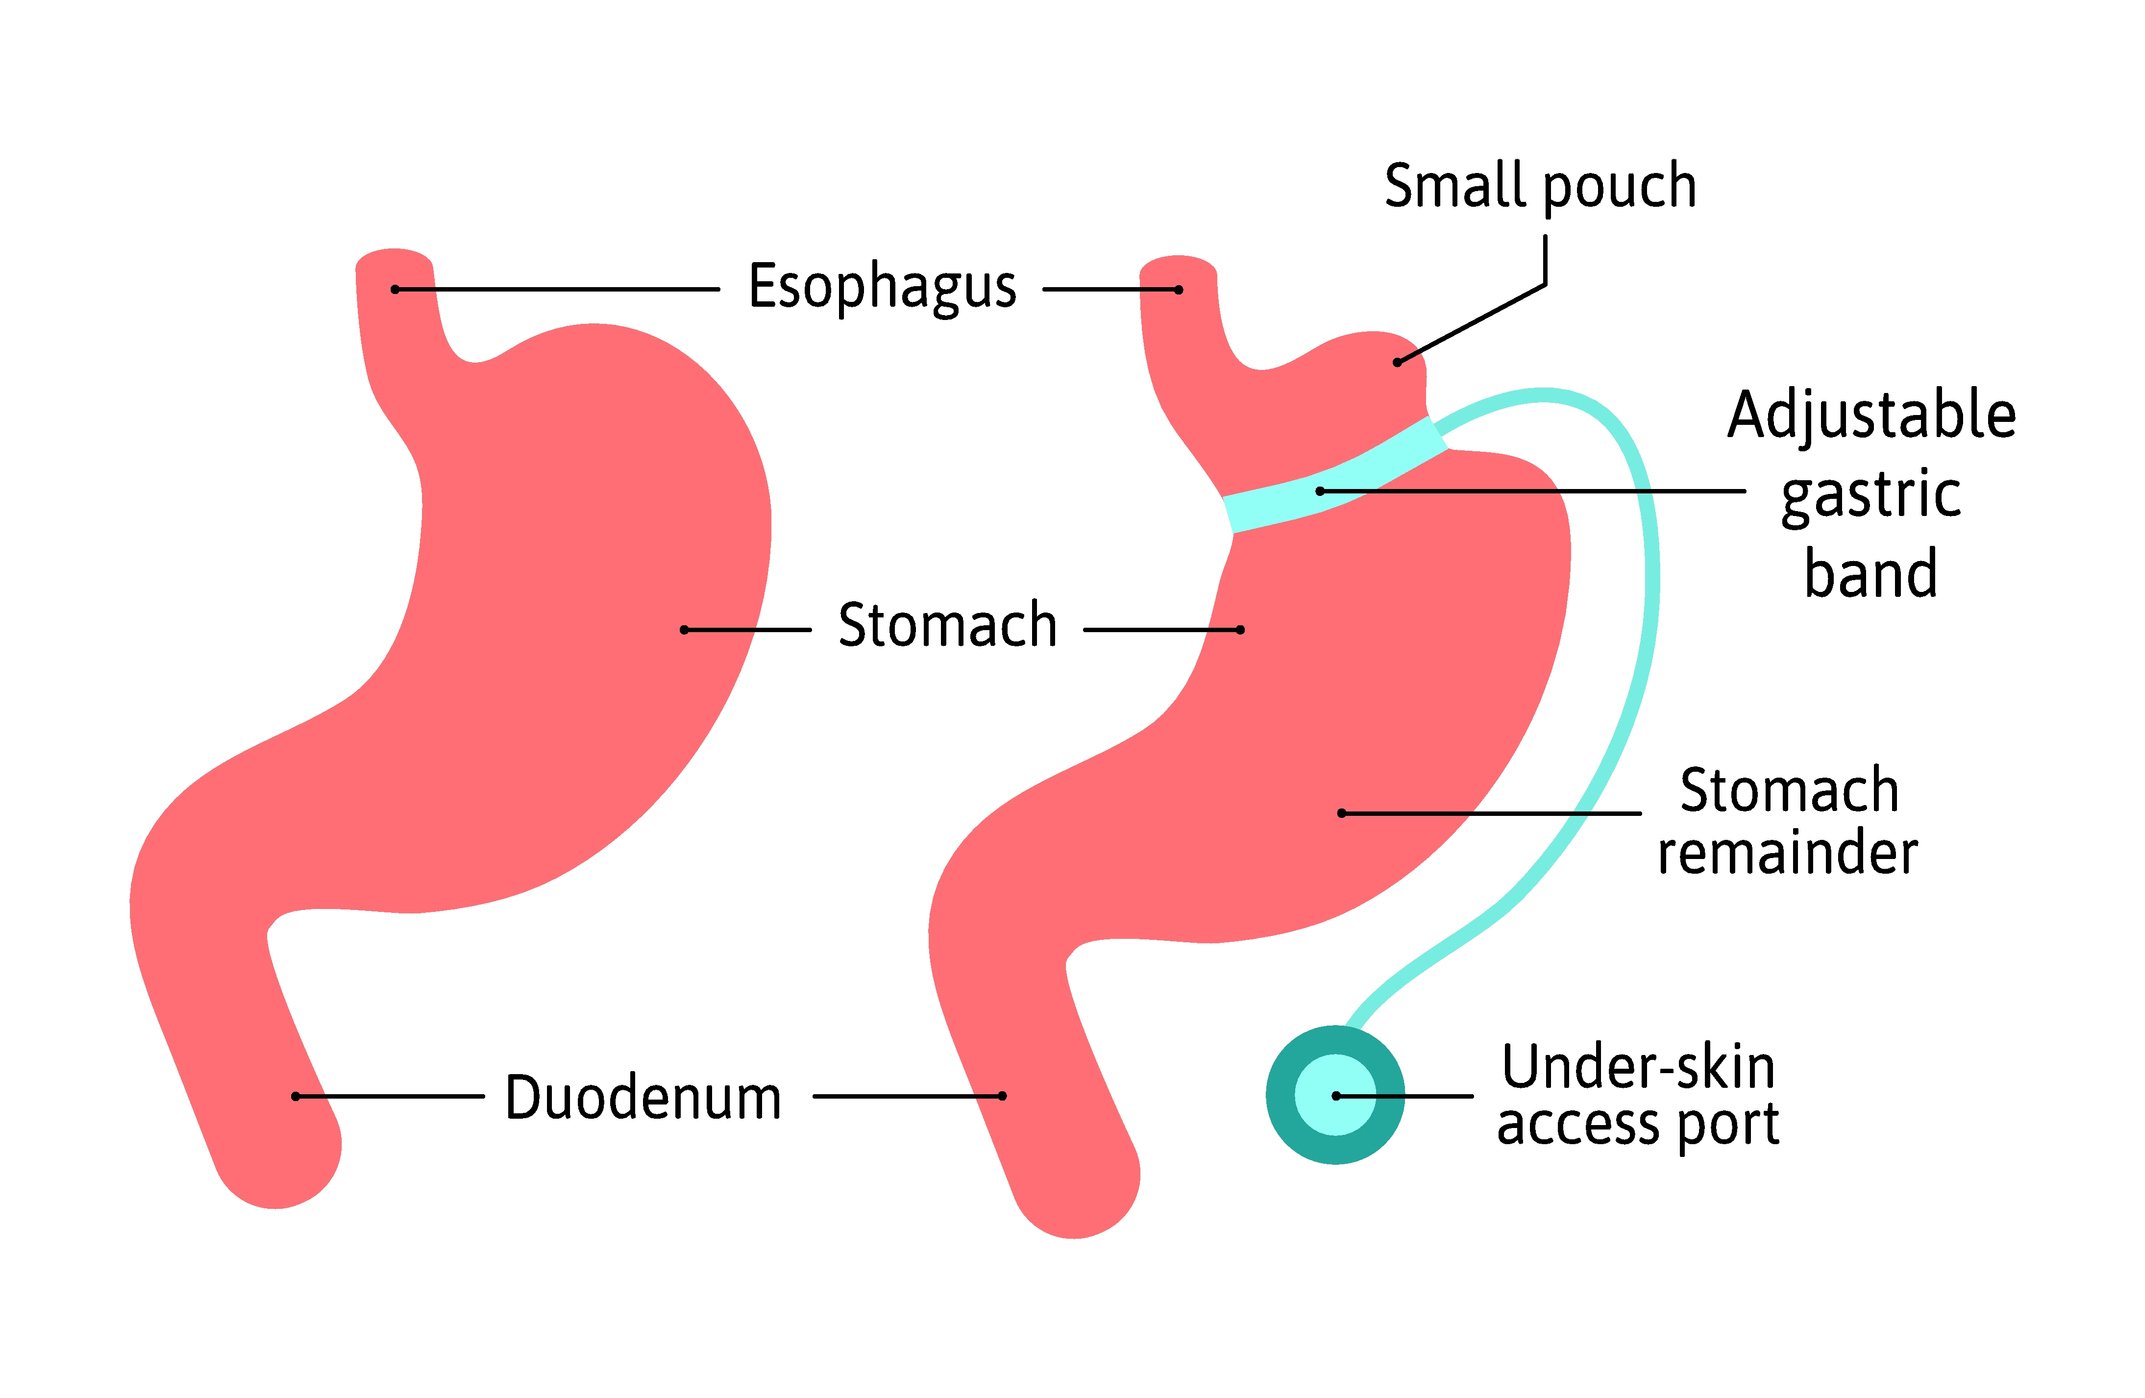 An image explaining the Gastric Band surgery.